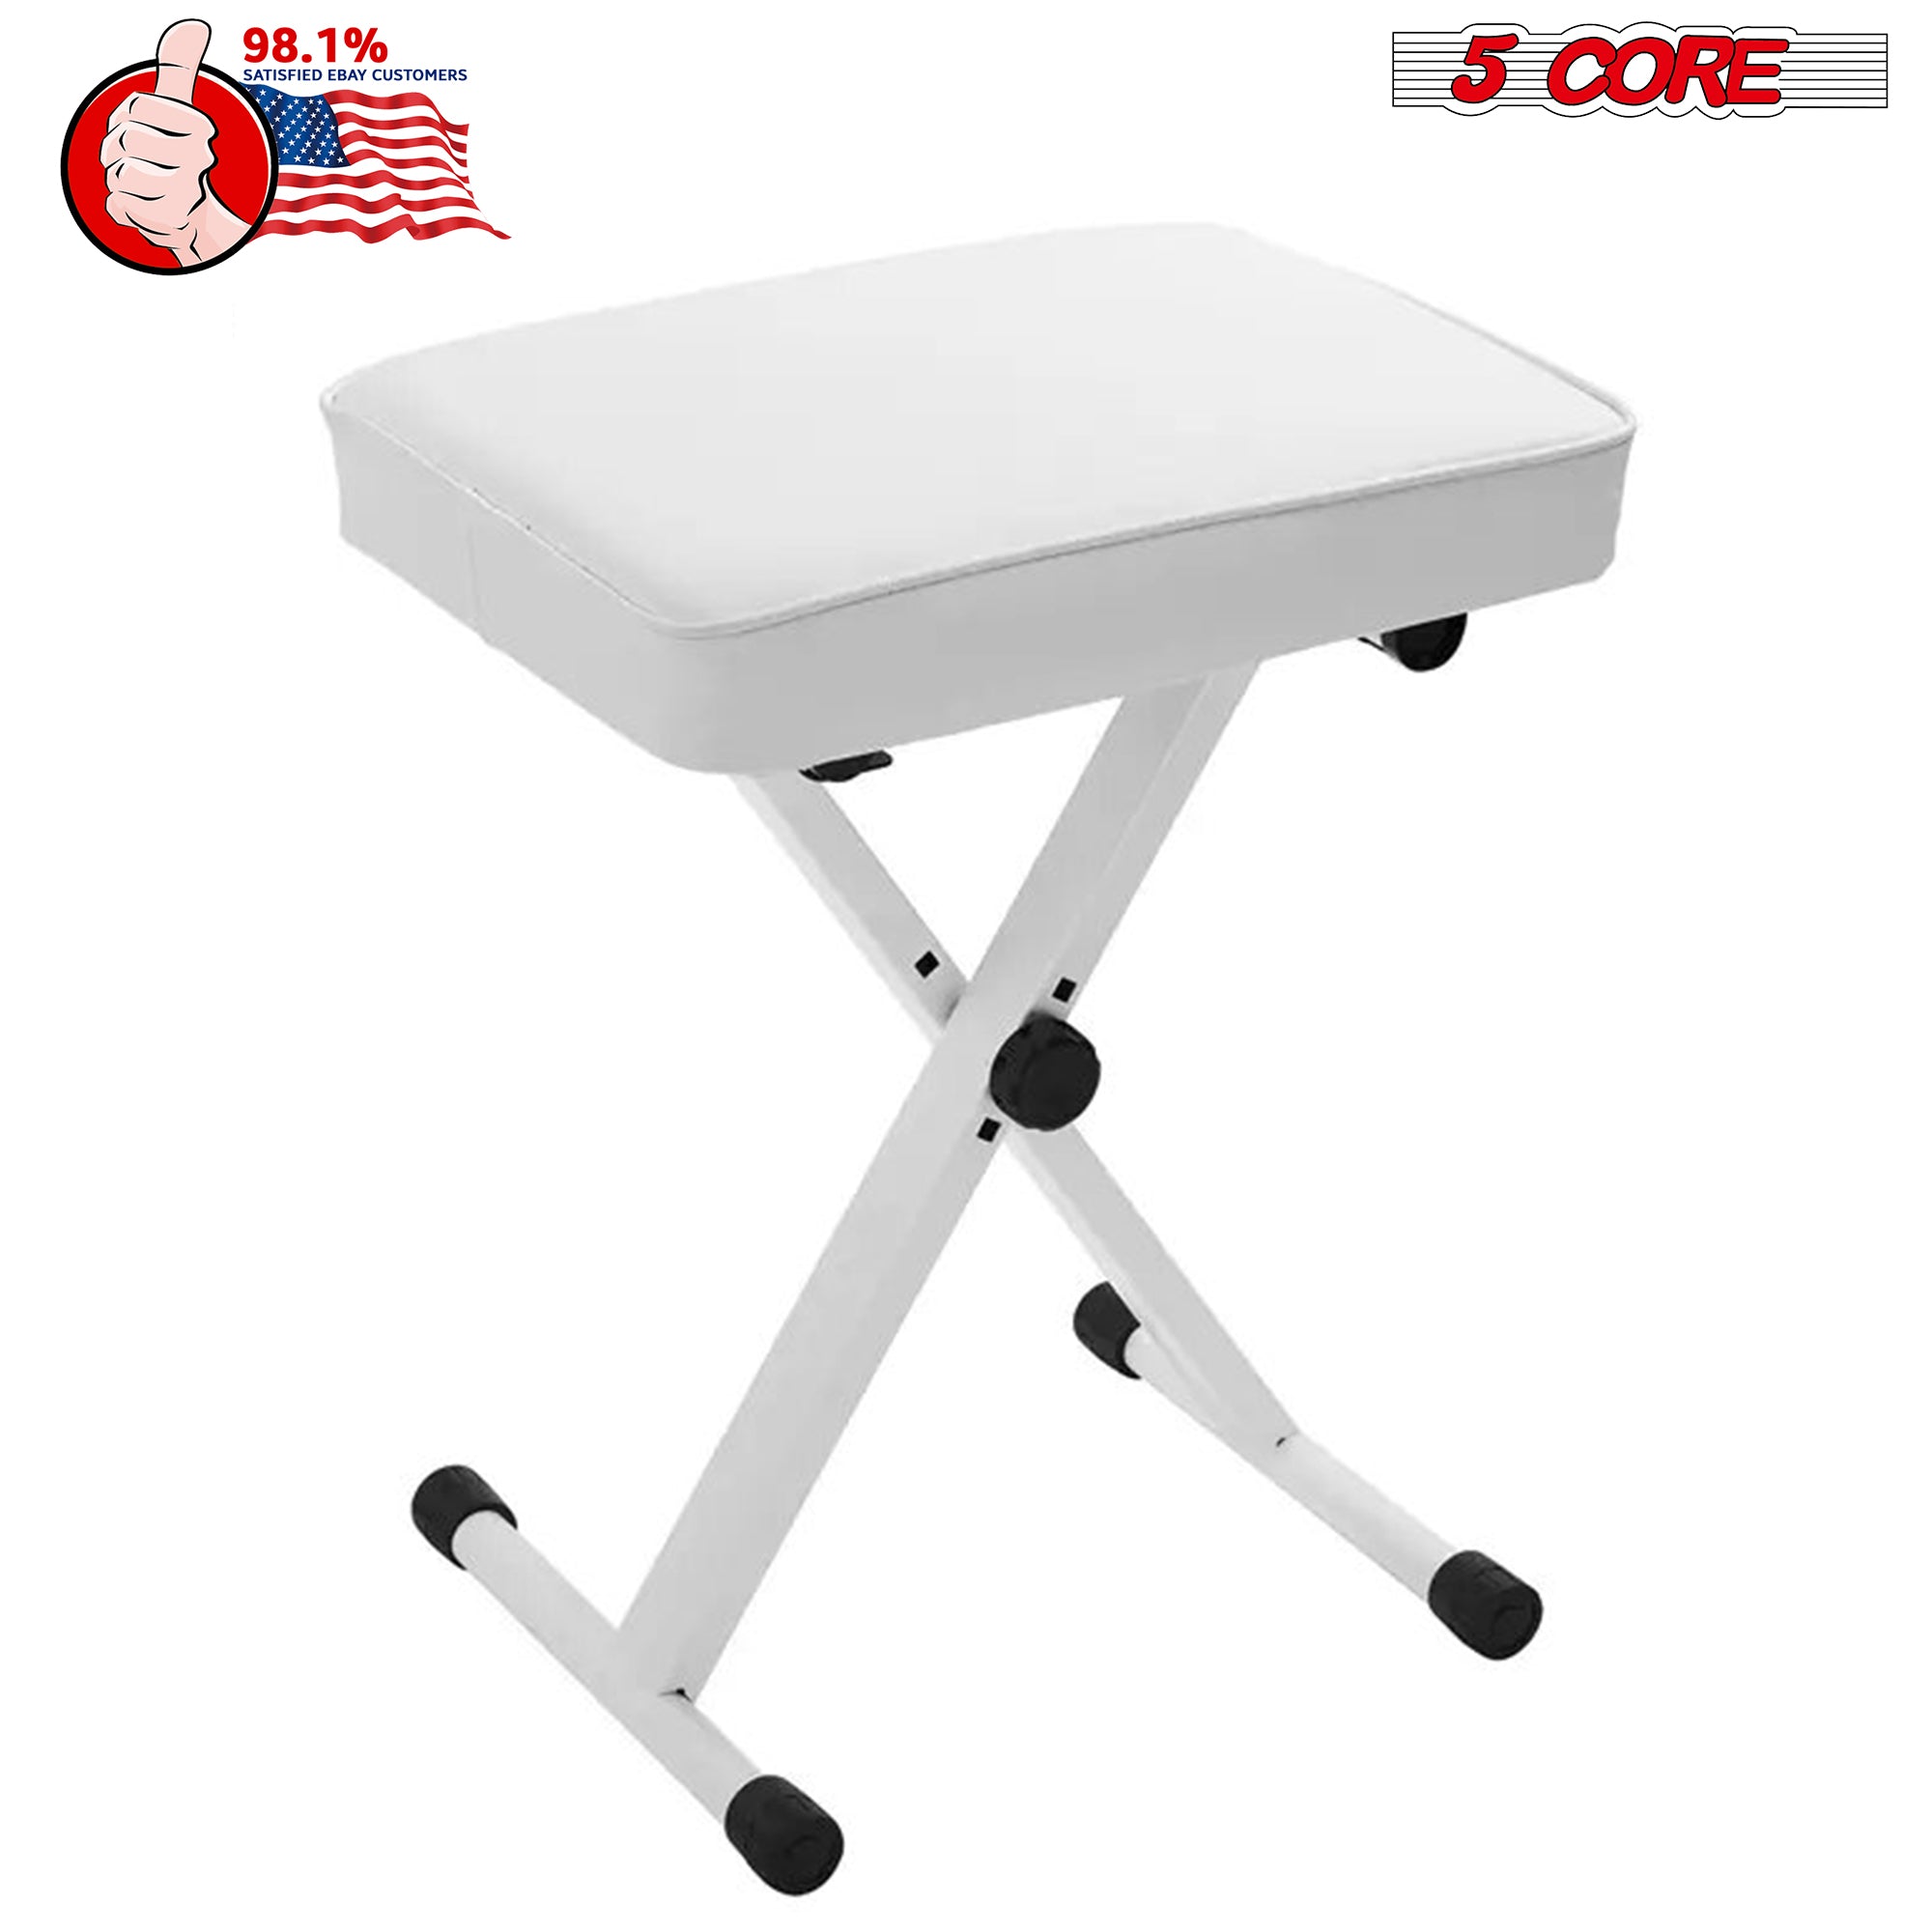 5 Core Adjustable Keyboard Bench 18.5 - 24.2 Inch Heavy Duty X style Bench Piano Stool Chair Thick And Padded Comfortable Guitar Stools -KBB WH HD